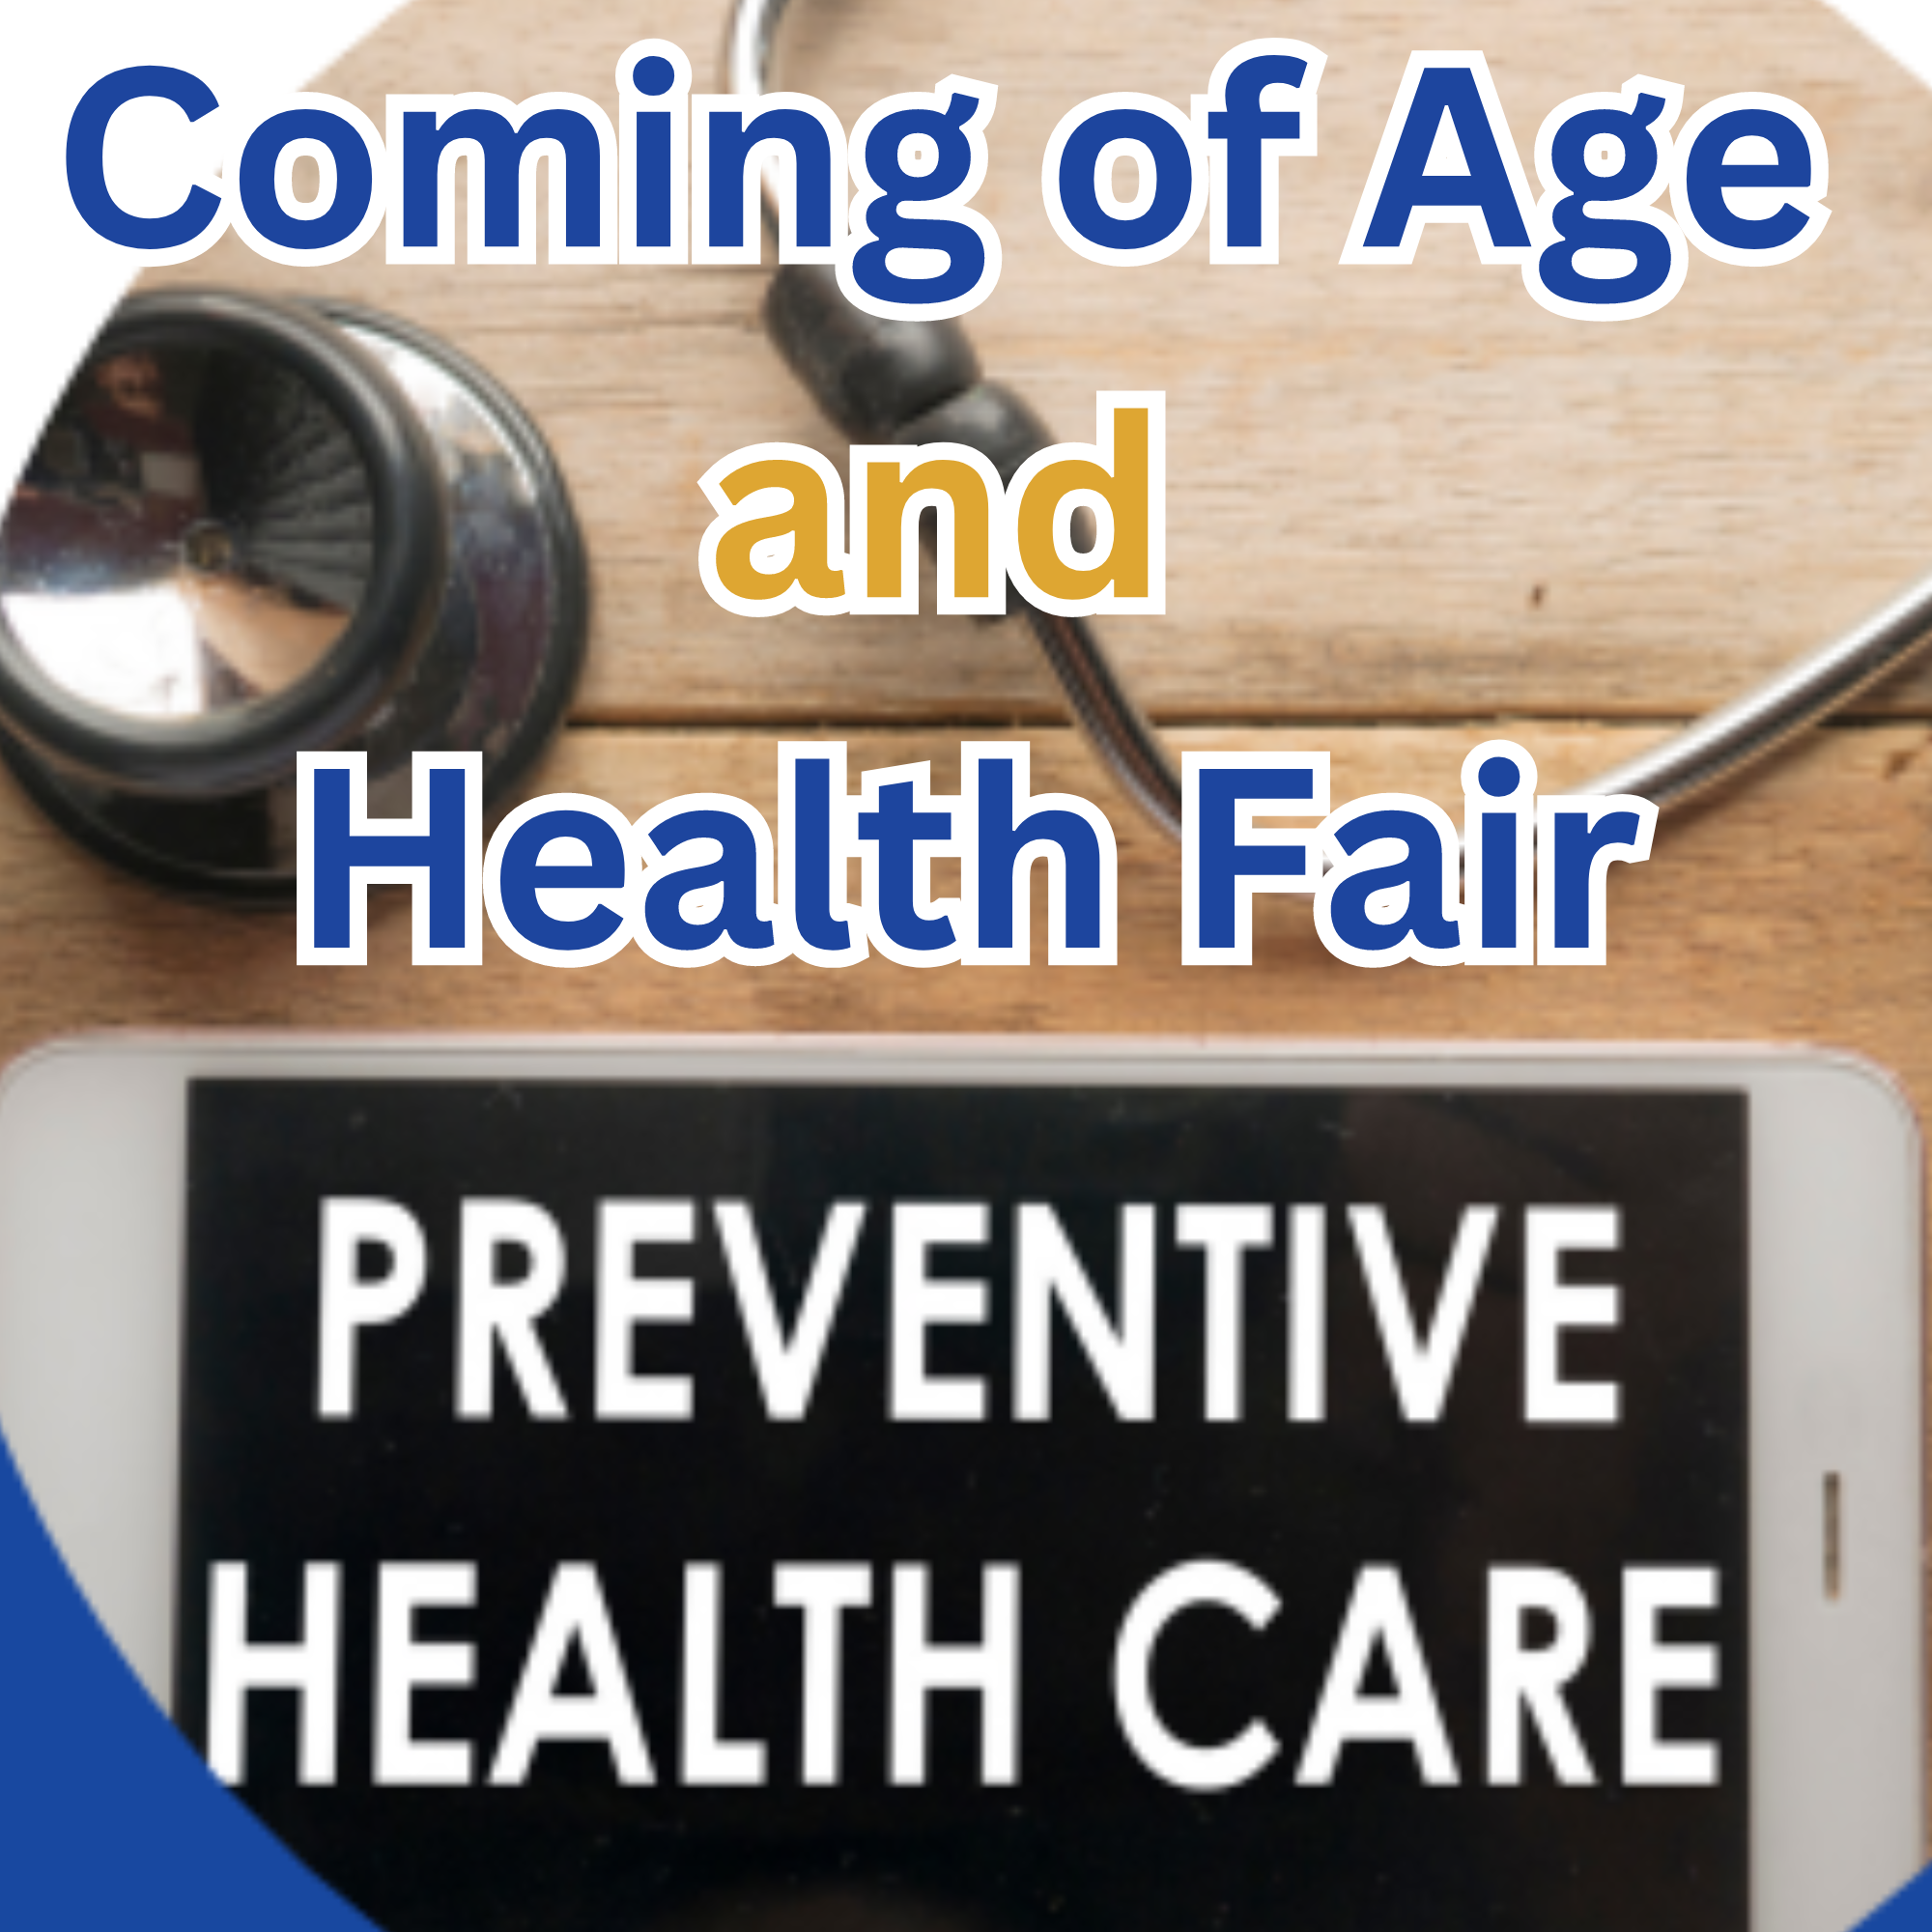 Coming of Age and Health Fair